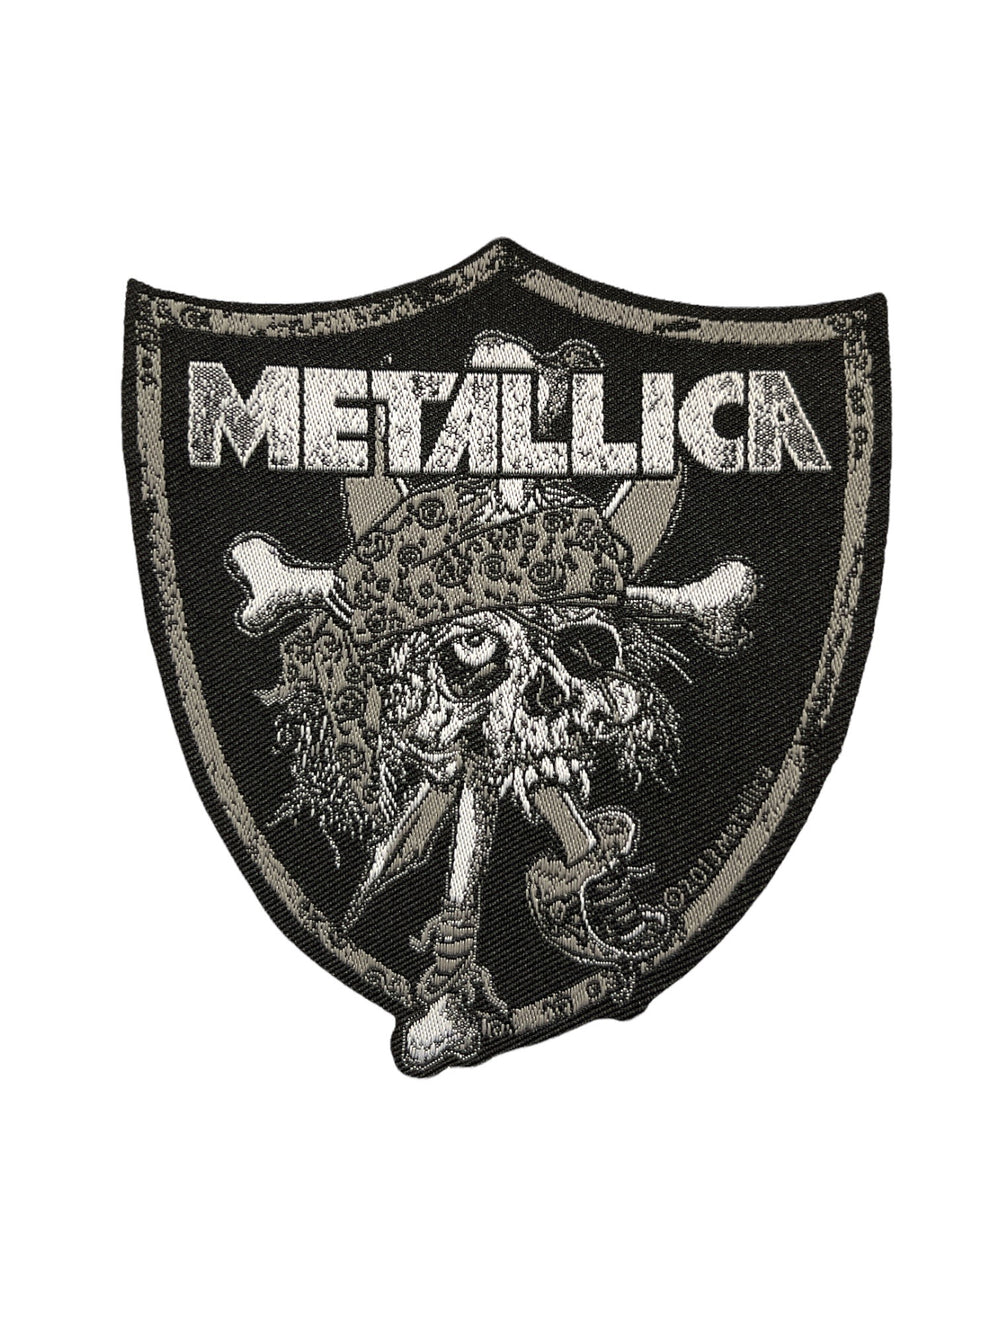 Metallica Raiders Official Woven Patch Brand New